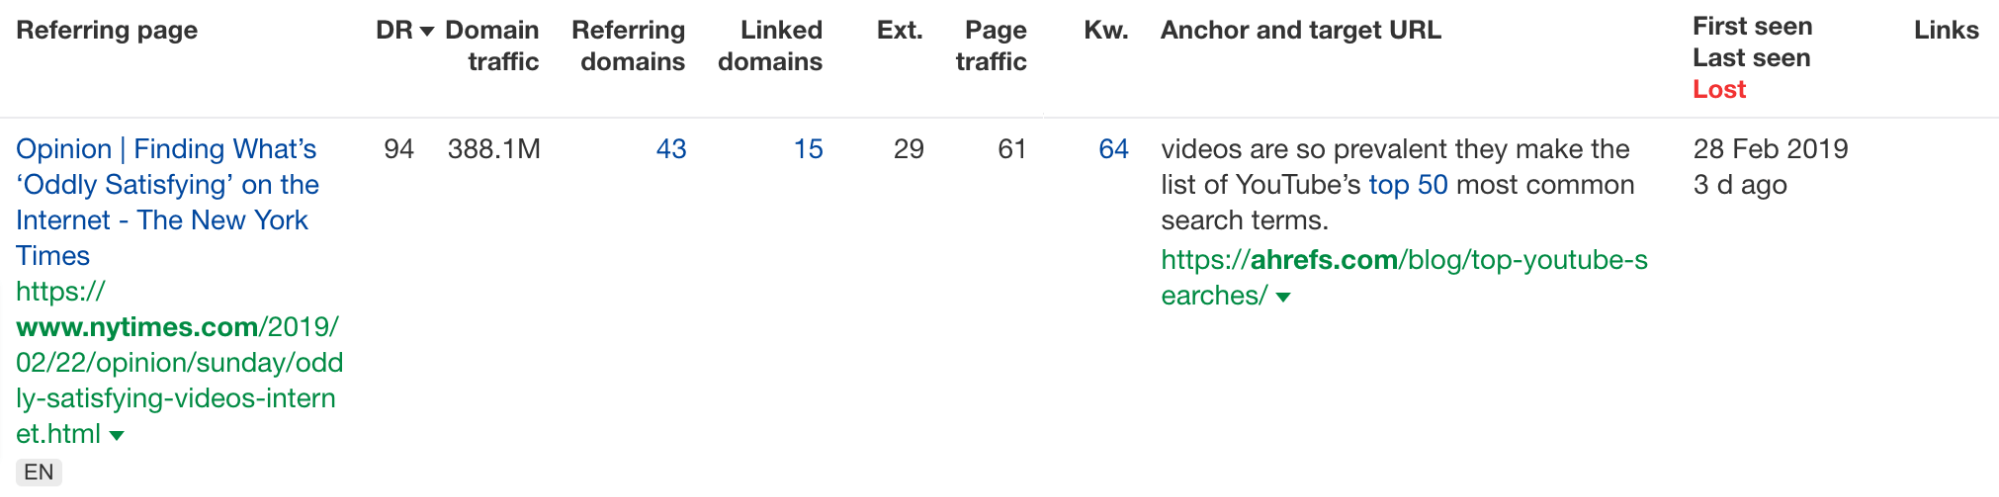 Backlinks report showing a link from a high-DR website